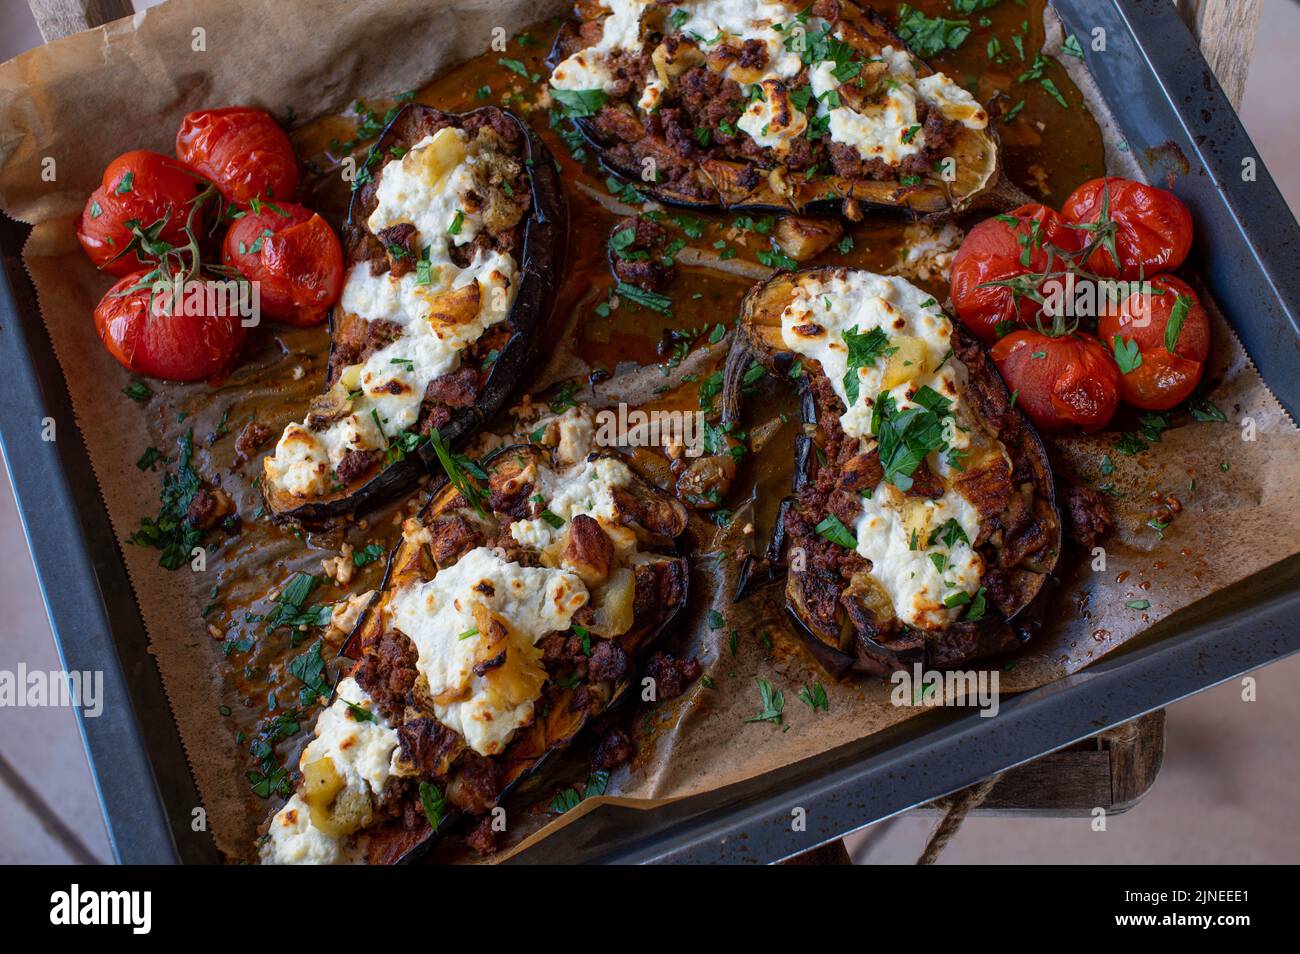 Stuffed aubergines with ground beef and feta cheese on a baking pan Stock Photo